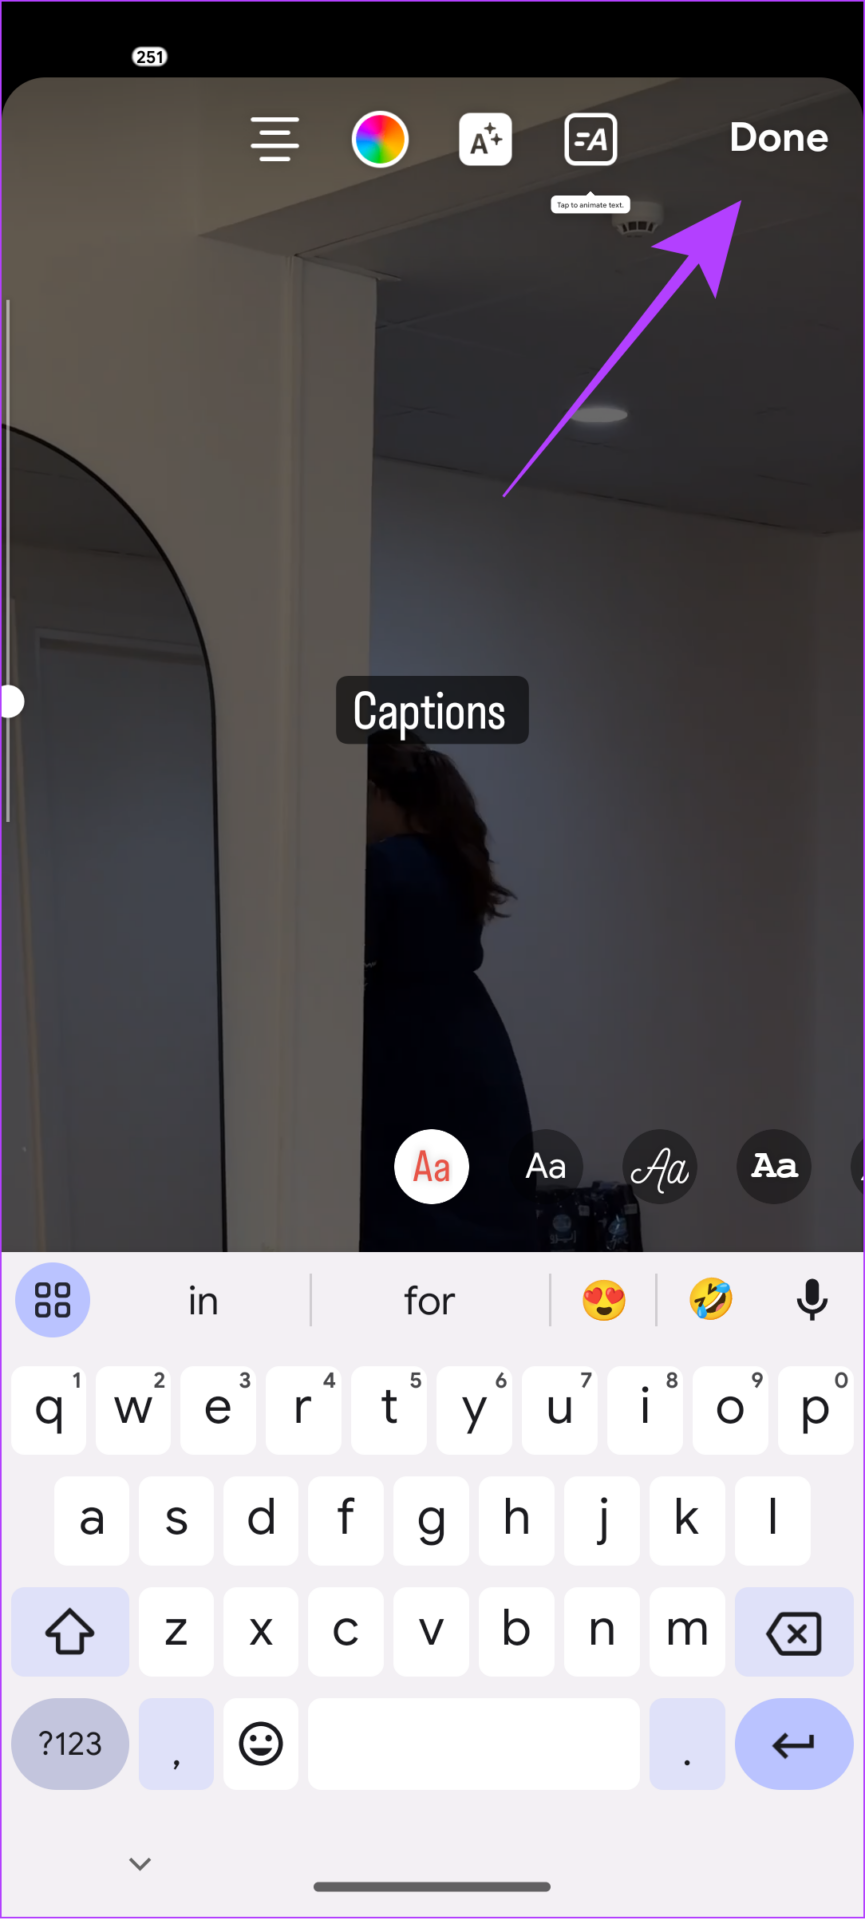 add captions and tap done
